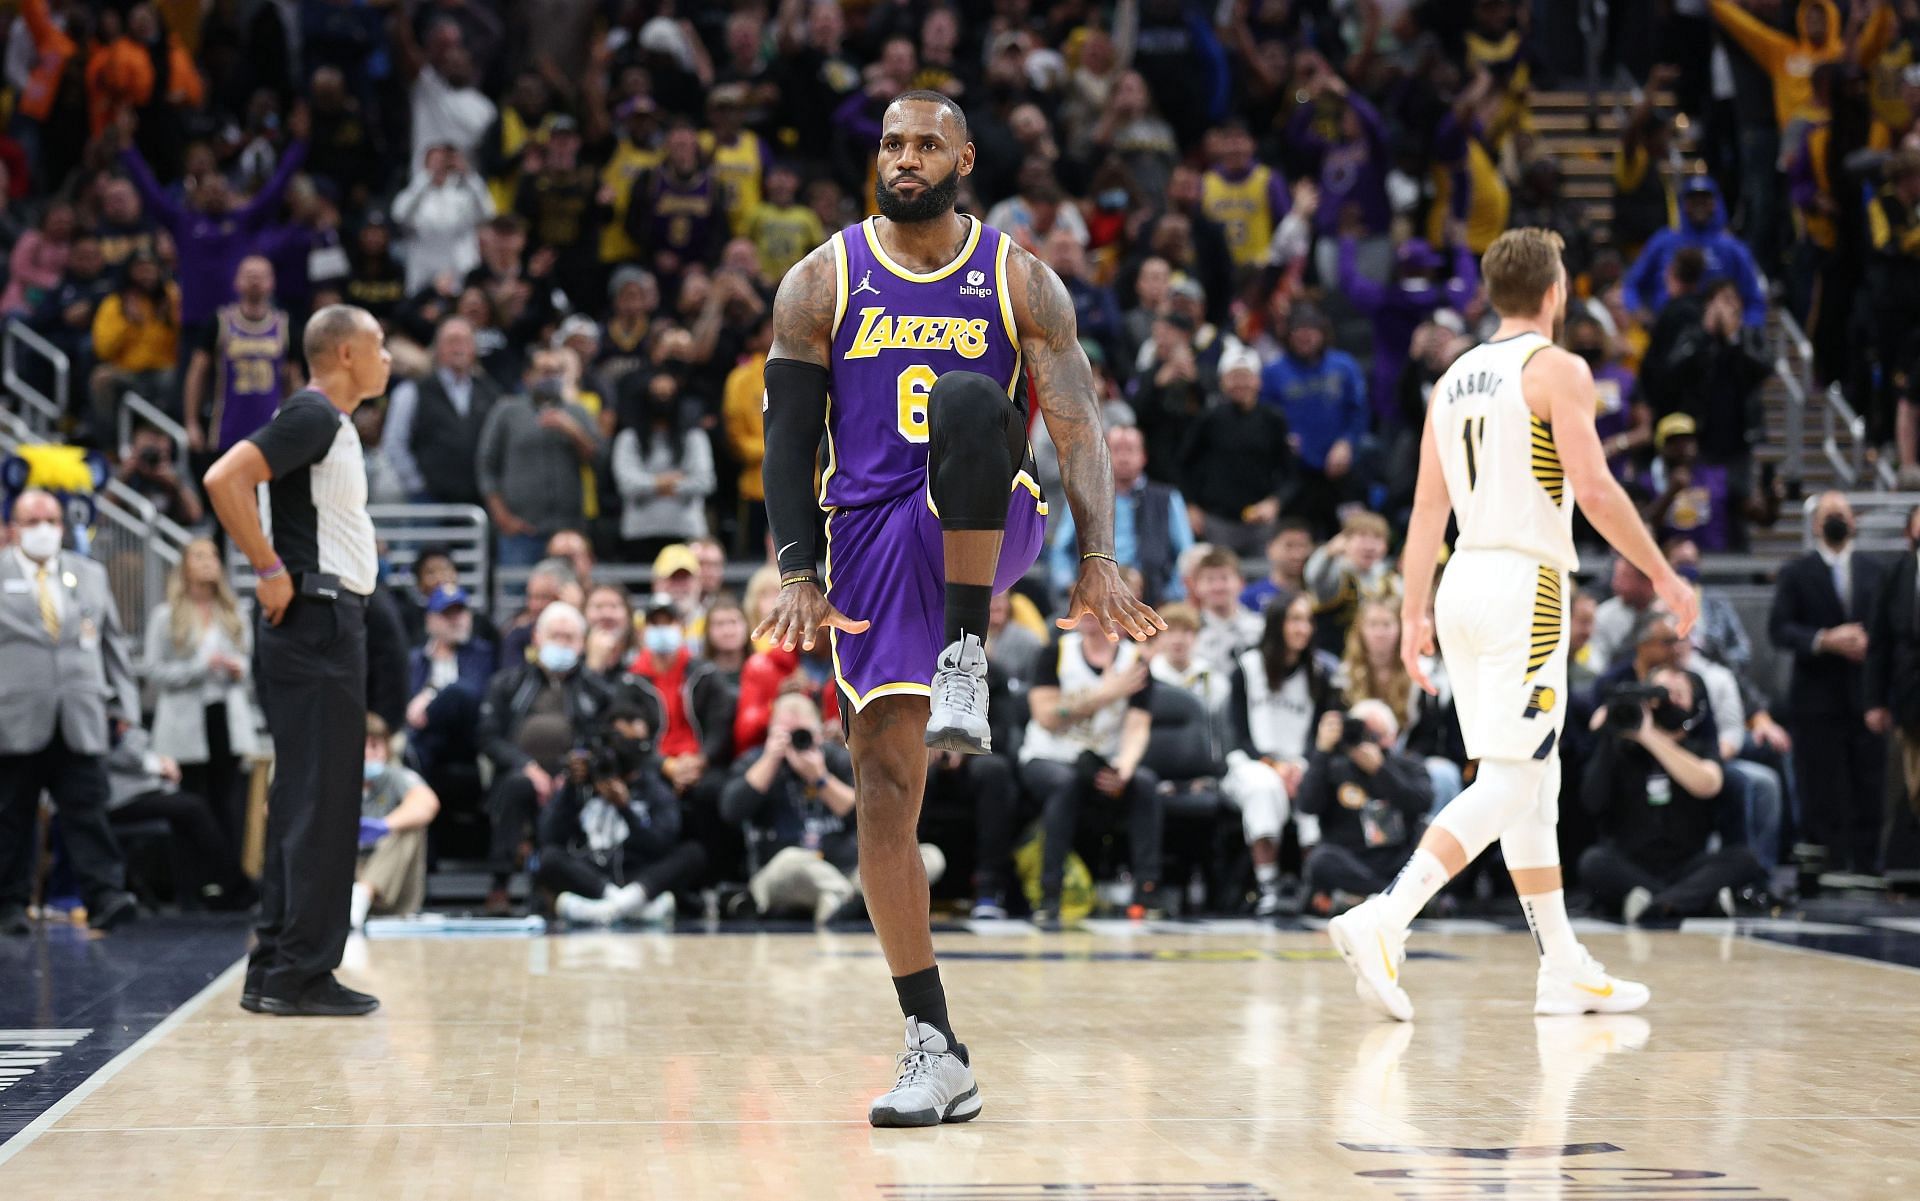 LeBron James #6 of the Los Angeles Lakers celebrates in the 124-116 OT win against the Indiana Pacers